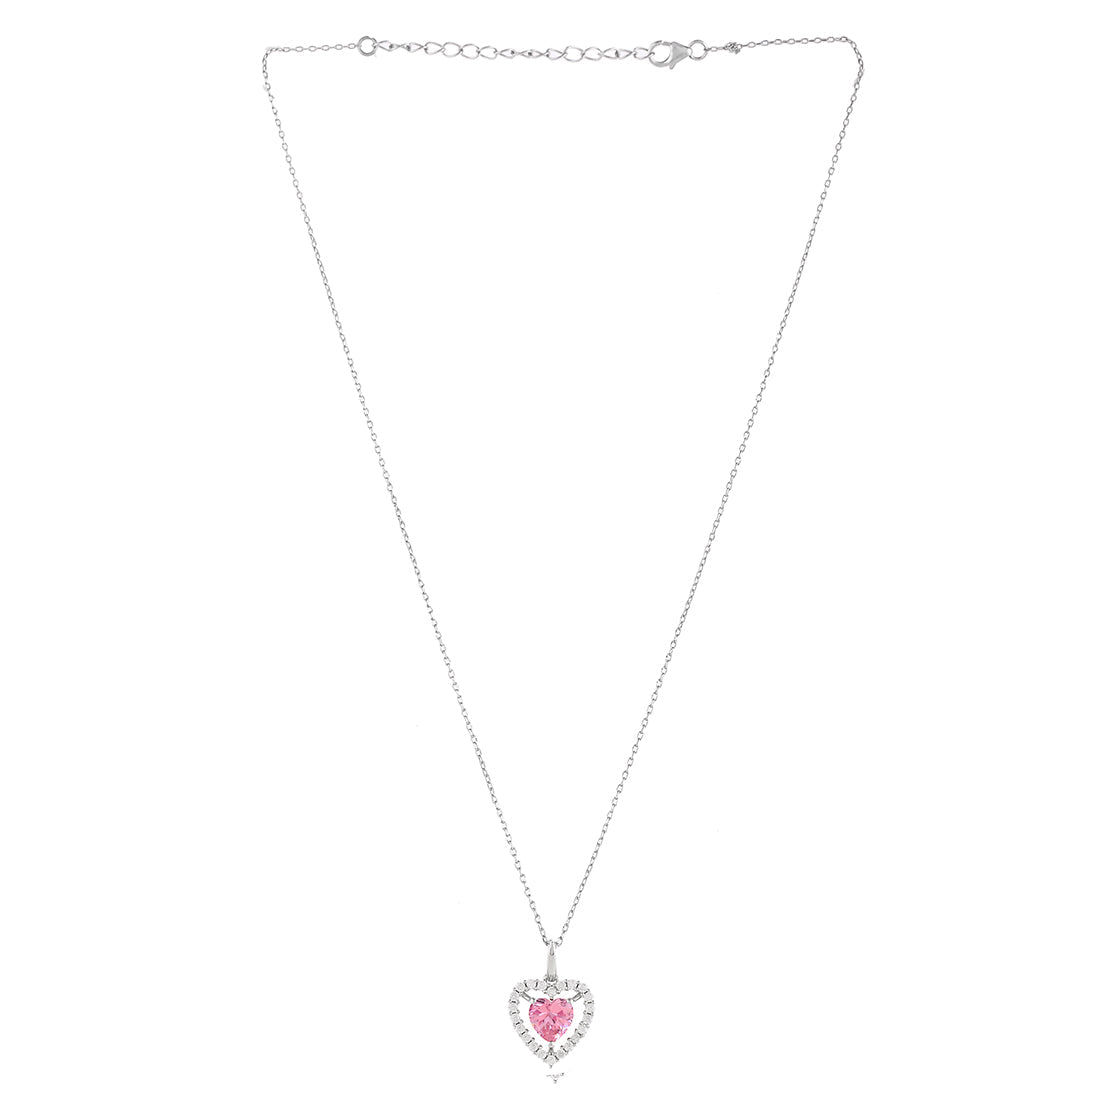 Women's Silver And Pink Cz Heart Pendant - Voylla